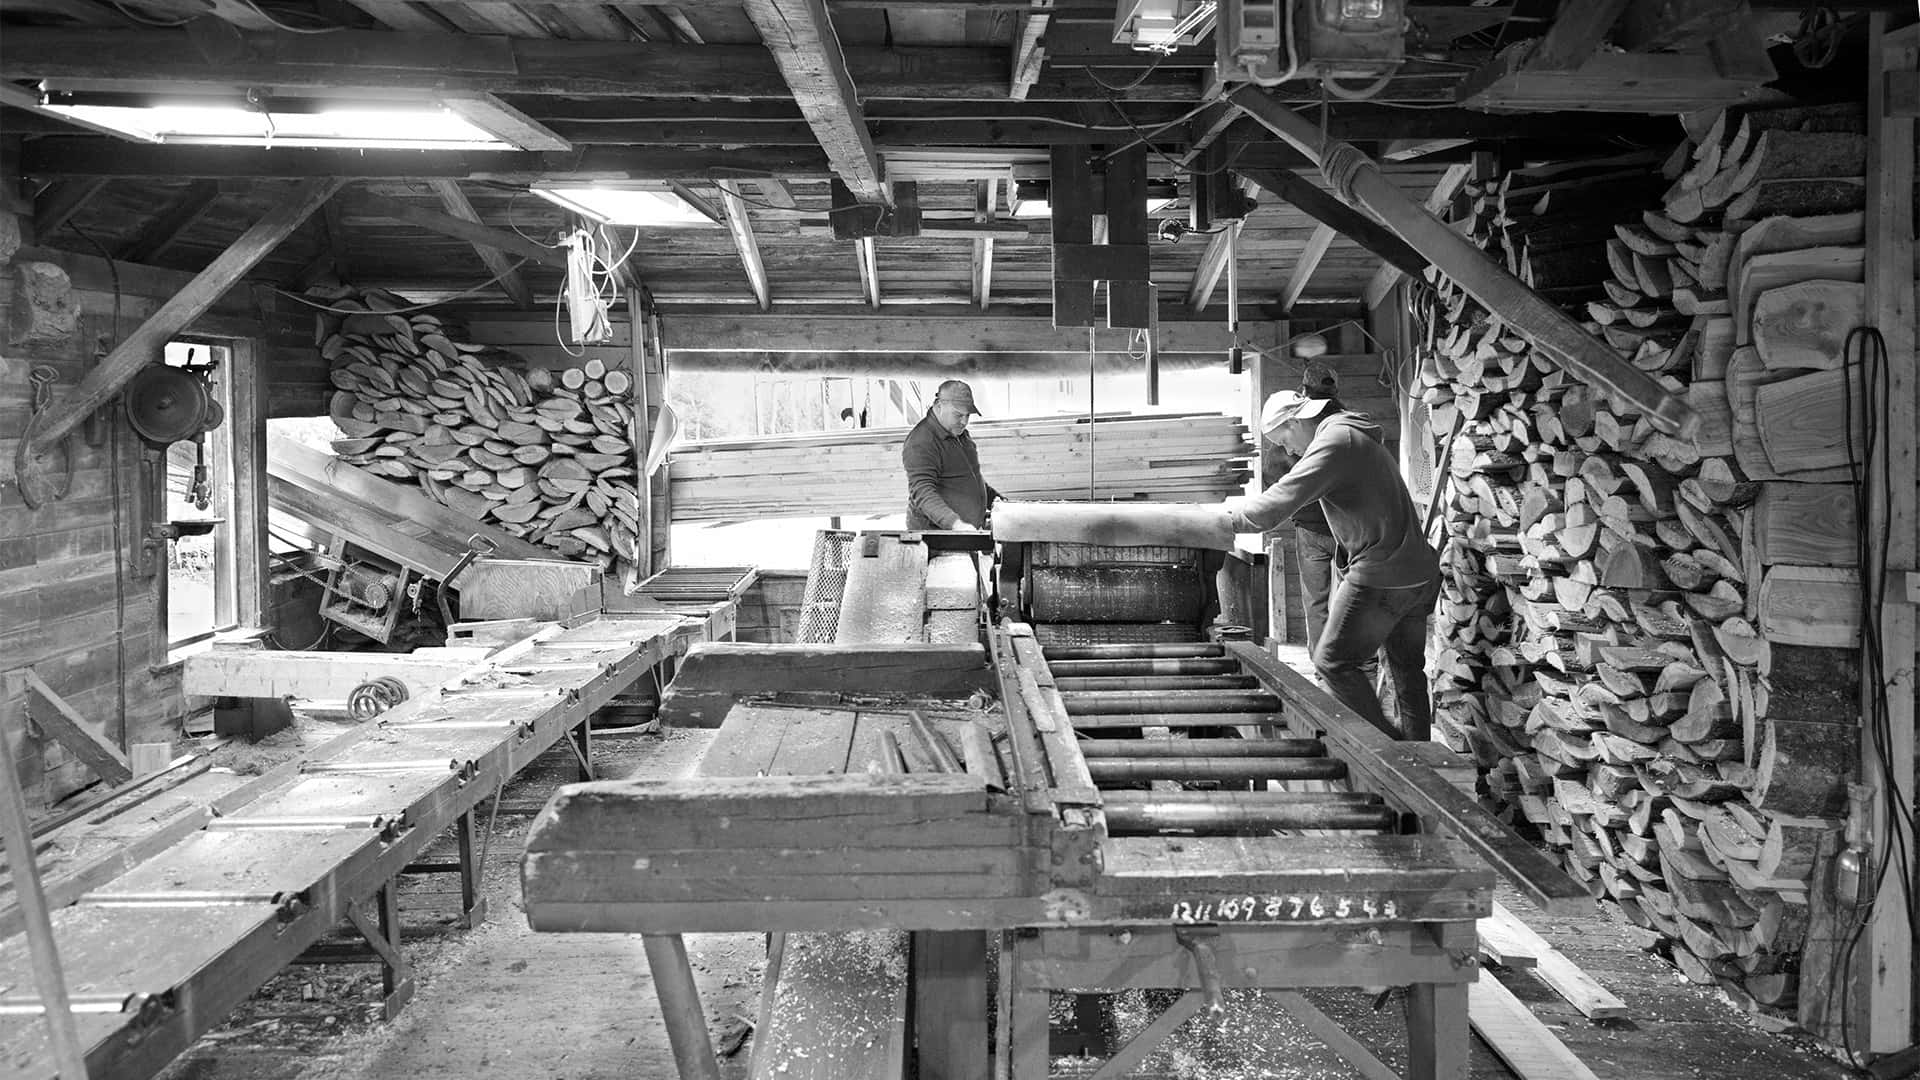 two men stand on opposite sides of a planer they are operating inside a local sawmill